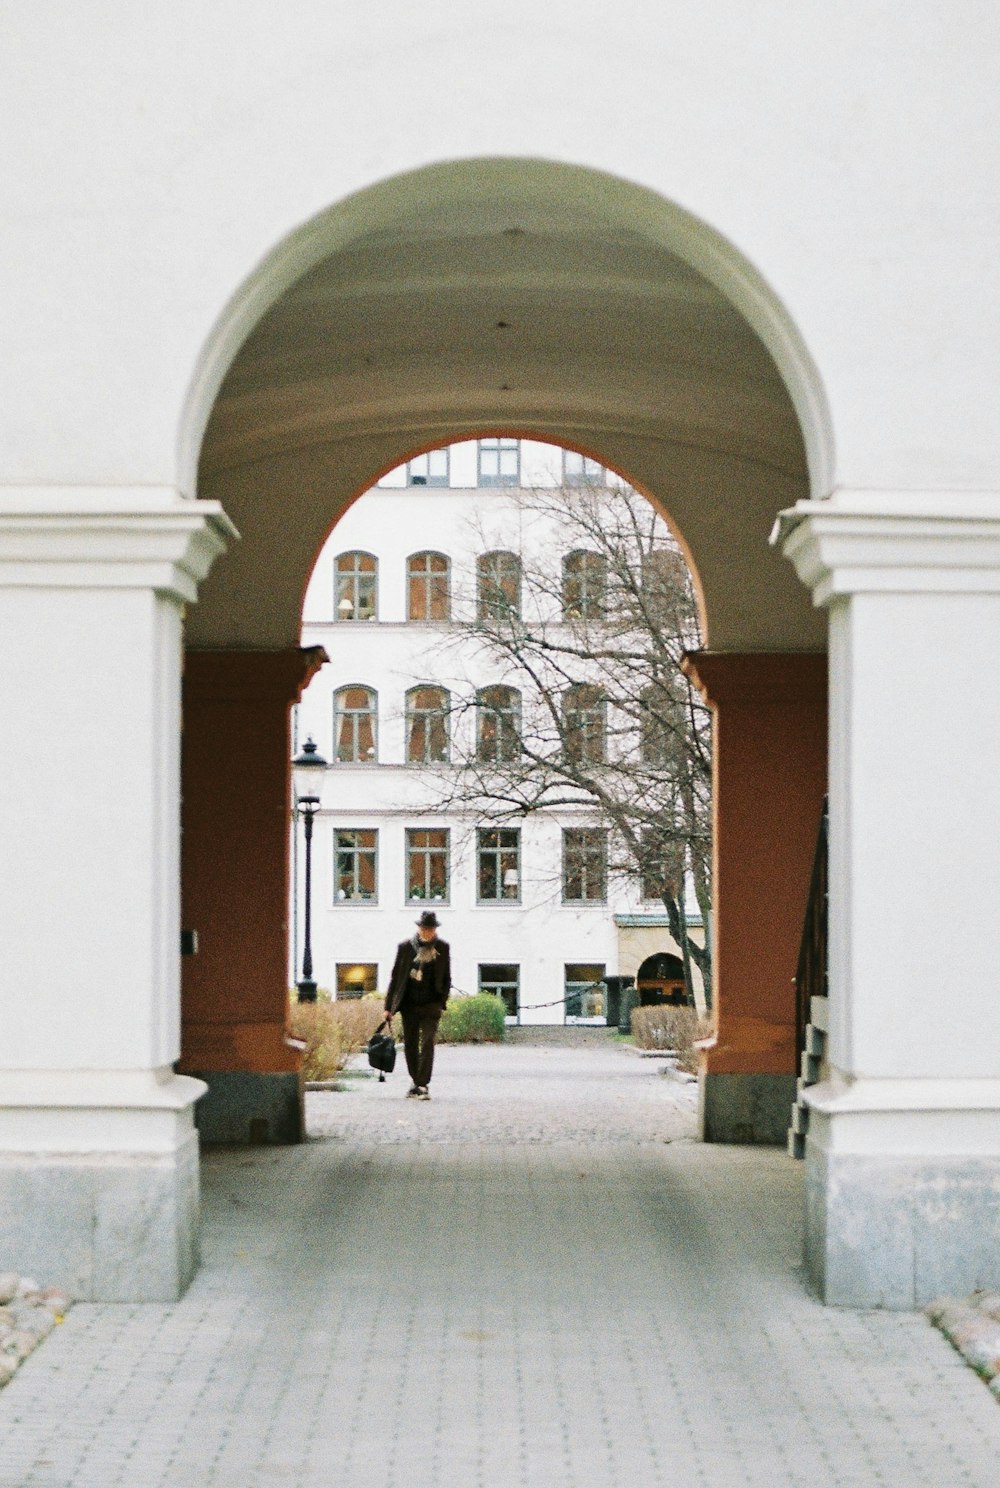 a person walking in a courtyard